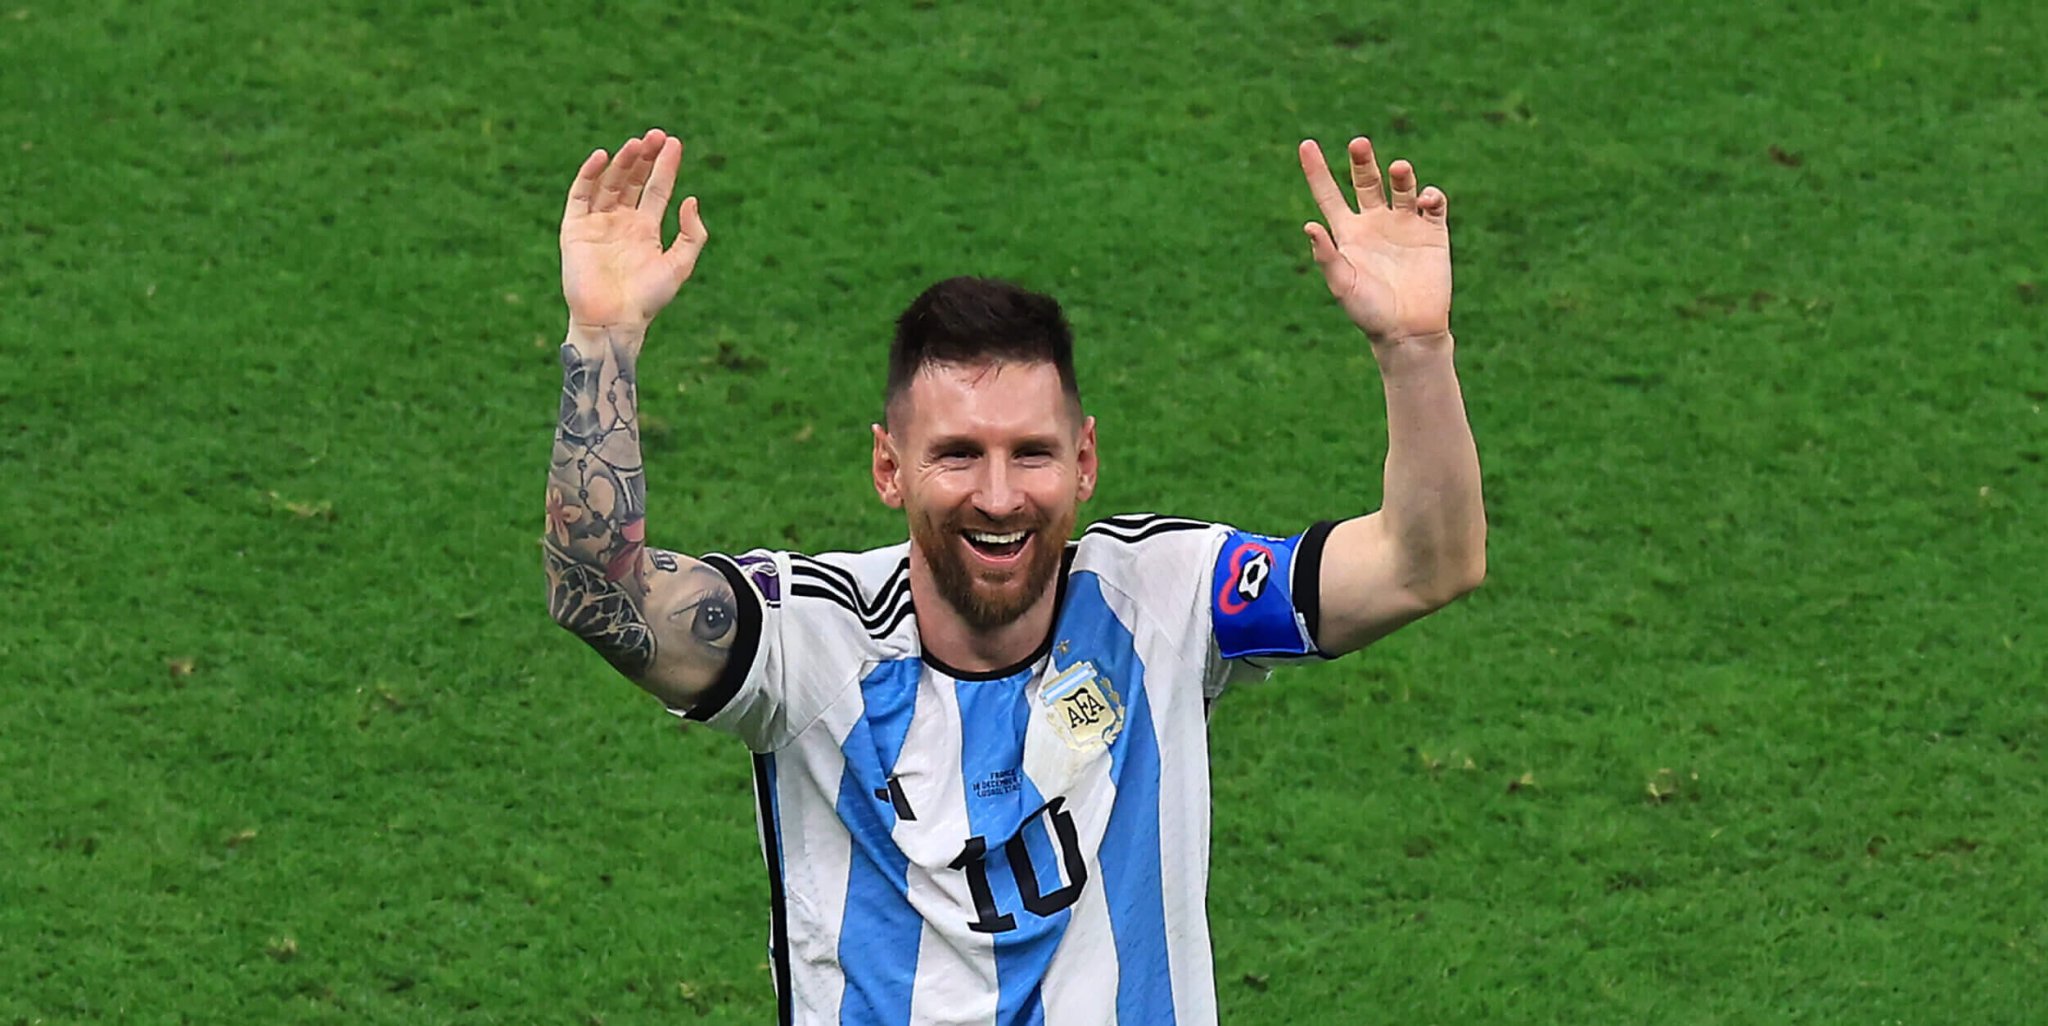 Argentina Defeats France in Penalty Shootout to Win World Cup in Legendary Final